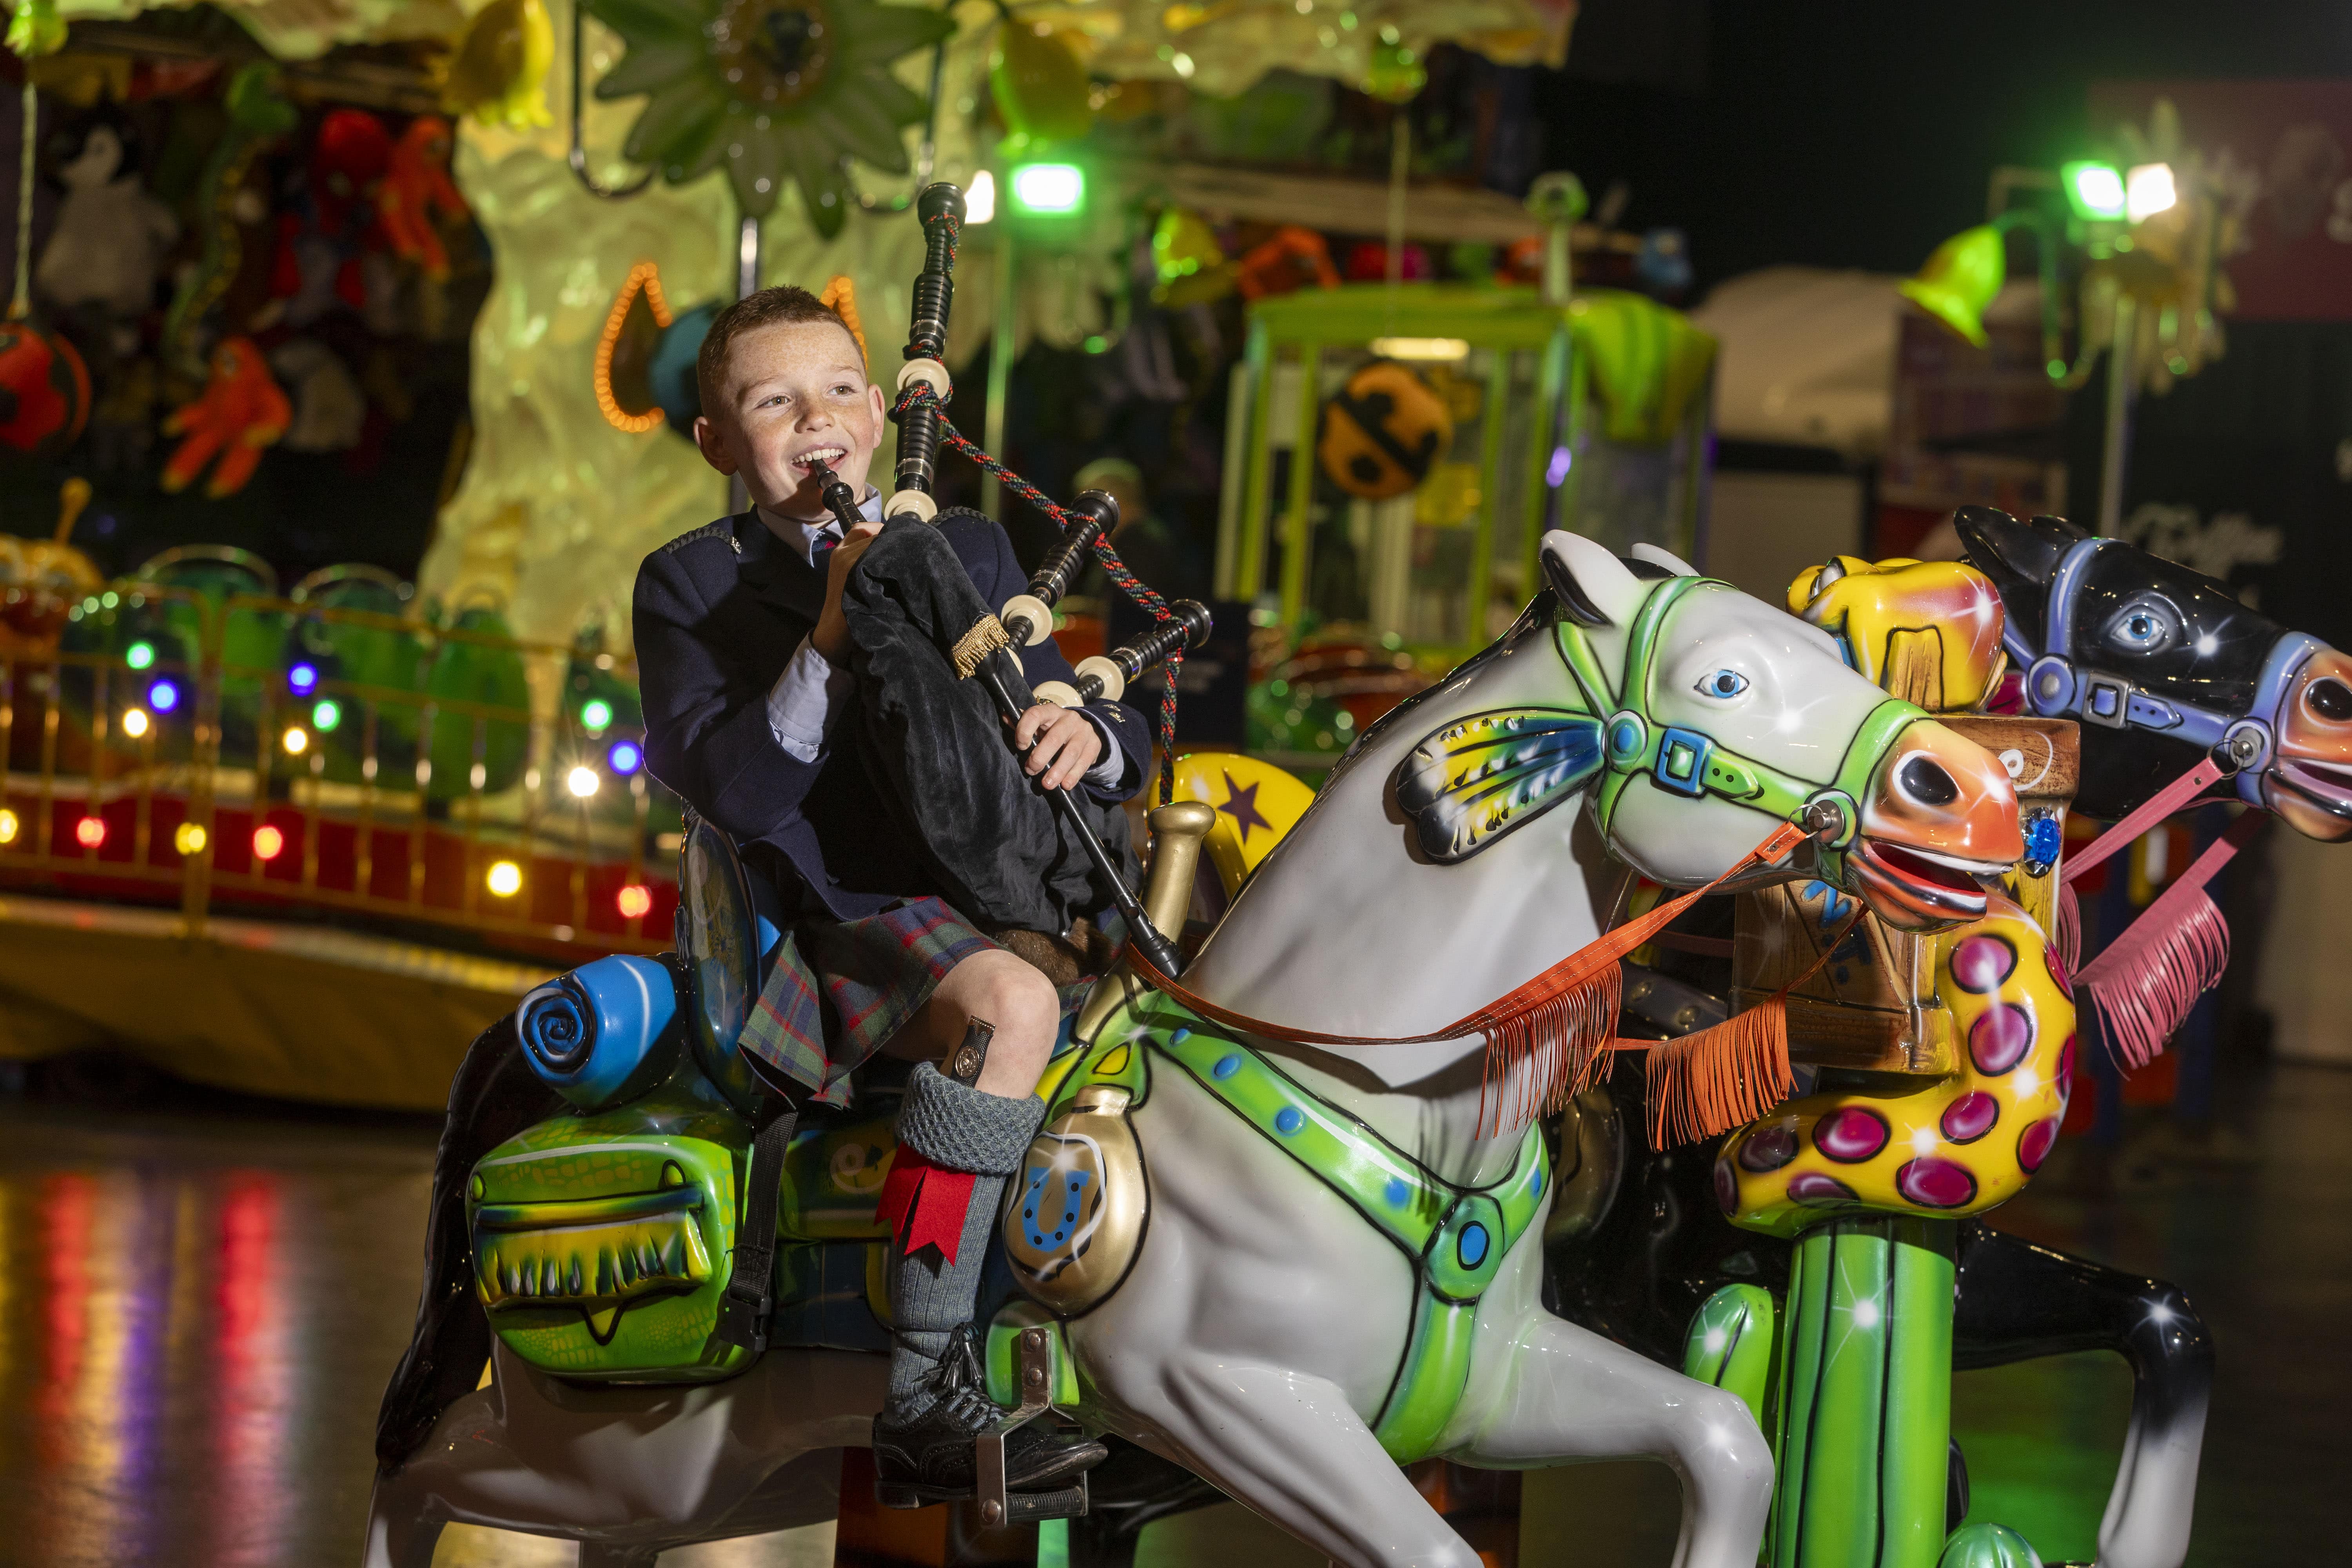 Ten-year-old bagpiper Jack Folan at the Irn-Bru Carnival